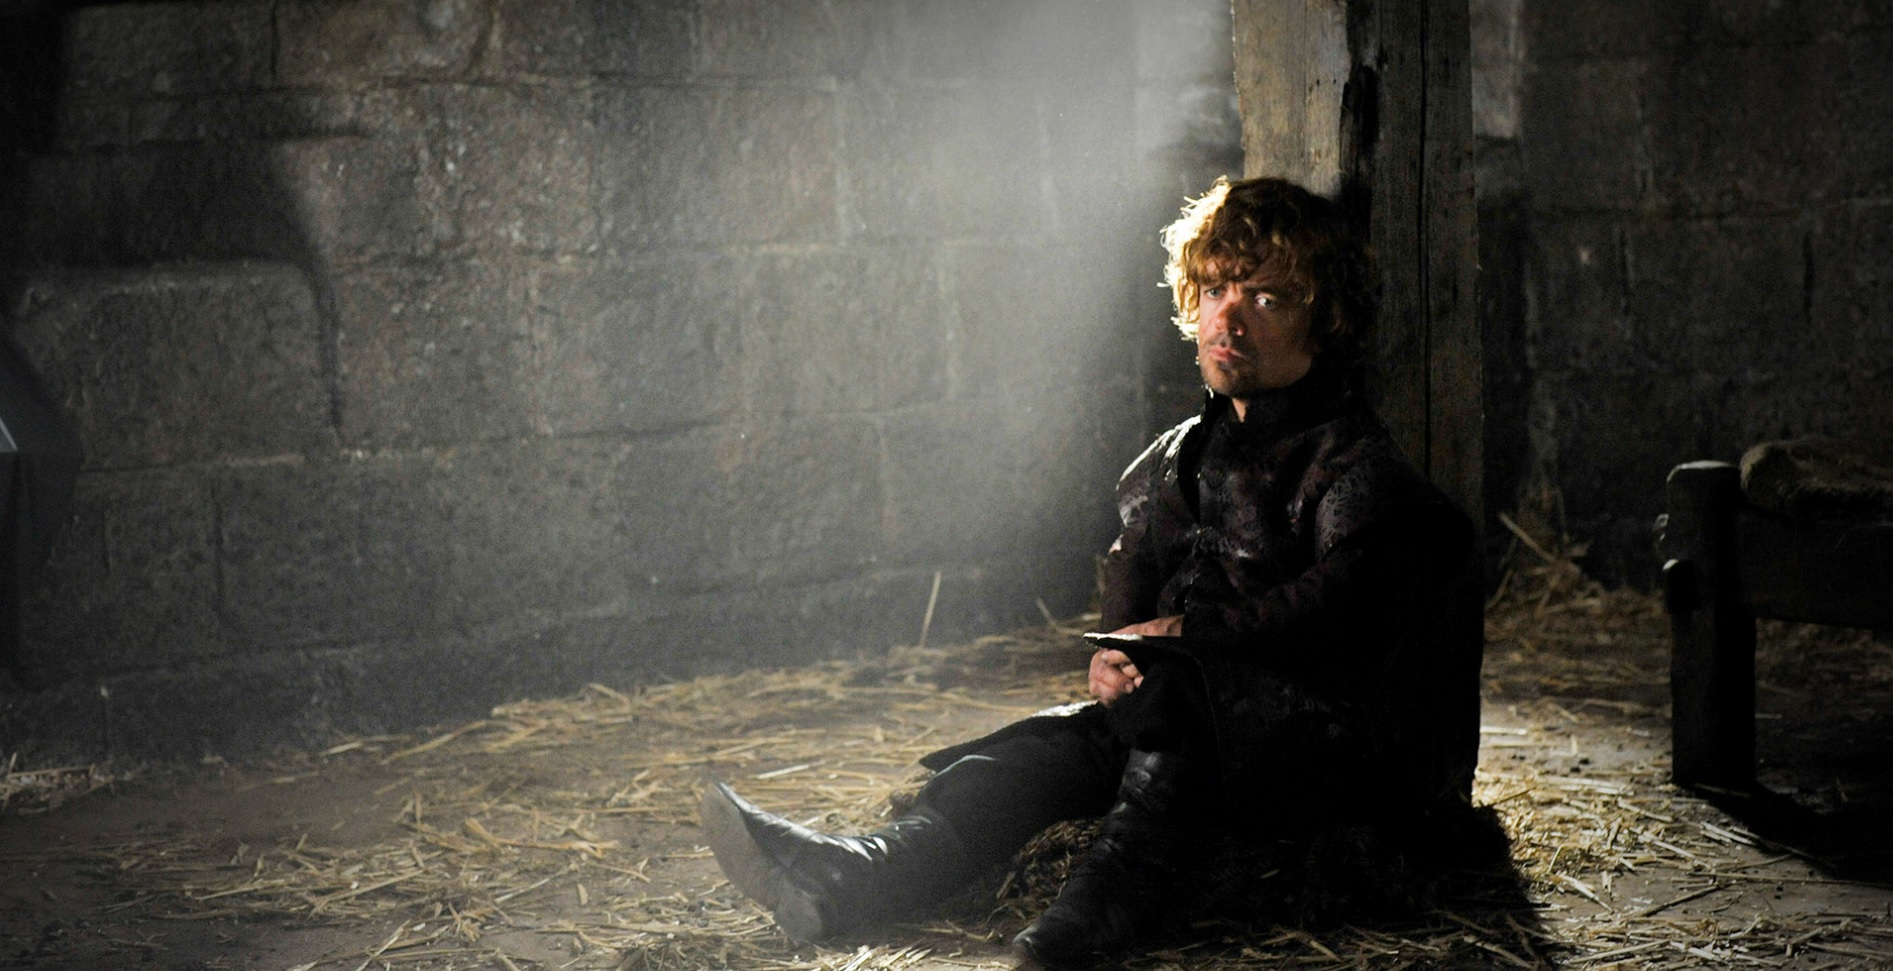   Tyrion in chains  image - HBO 